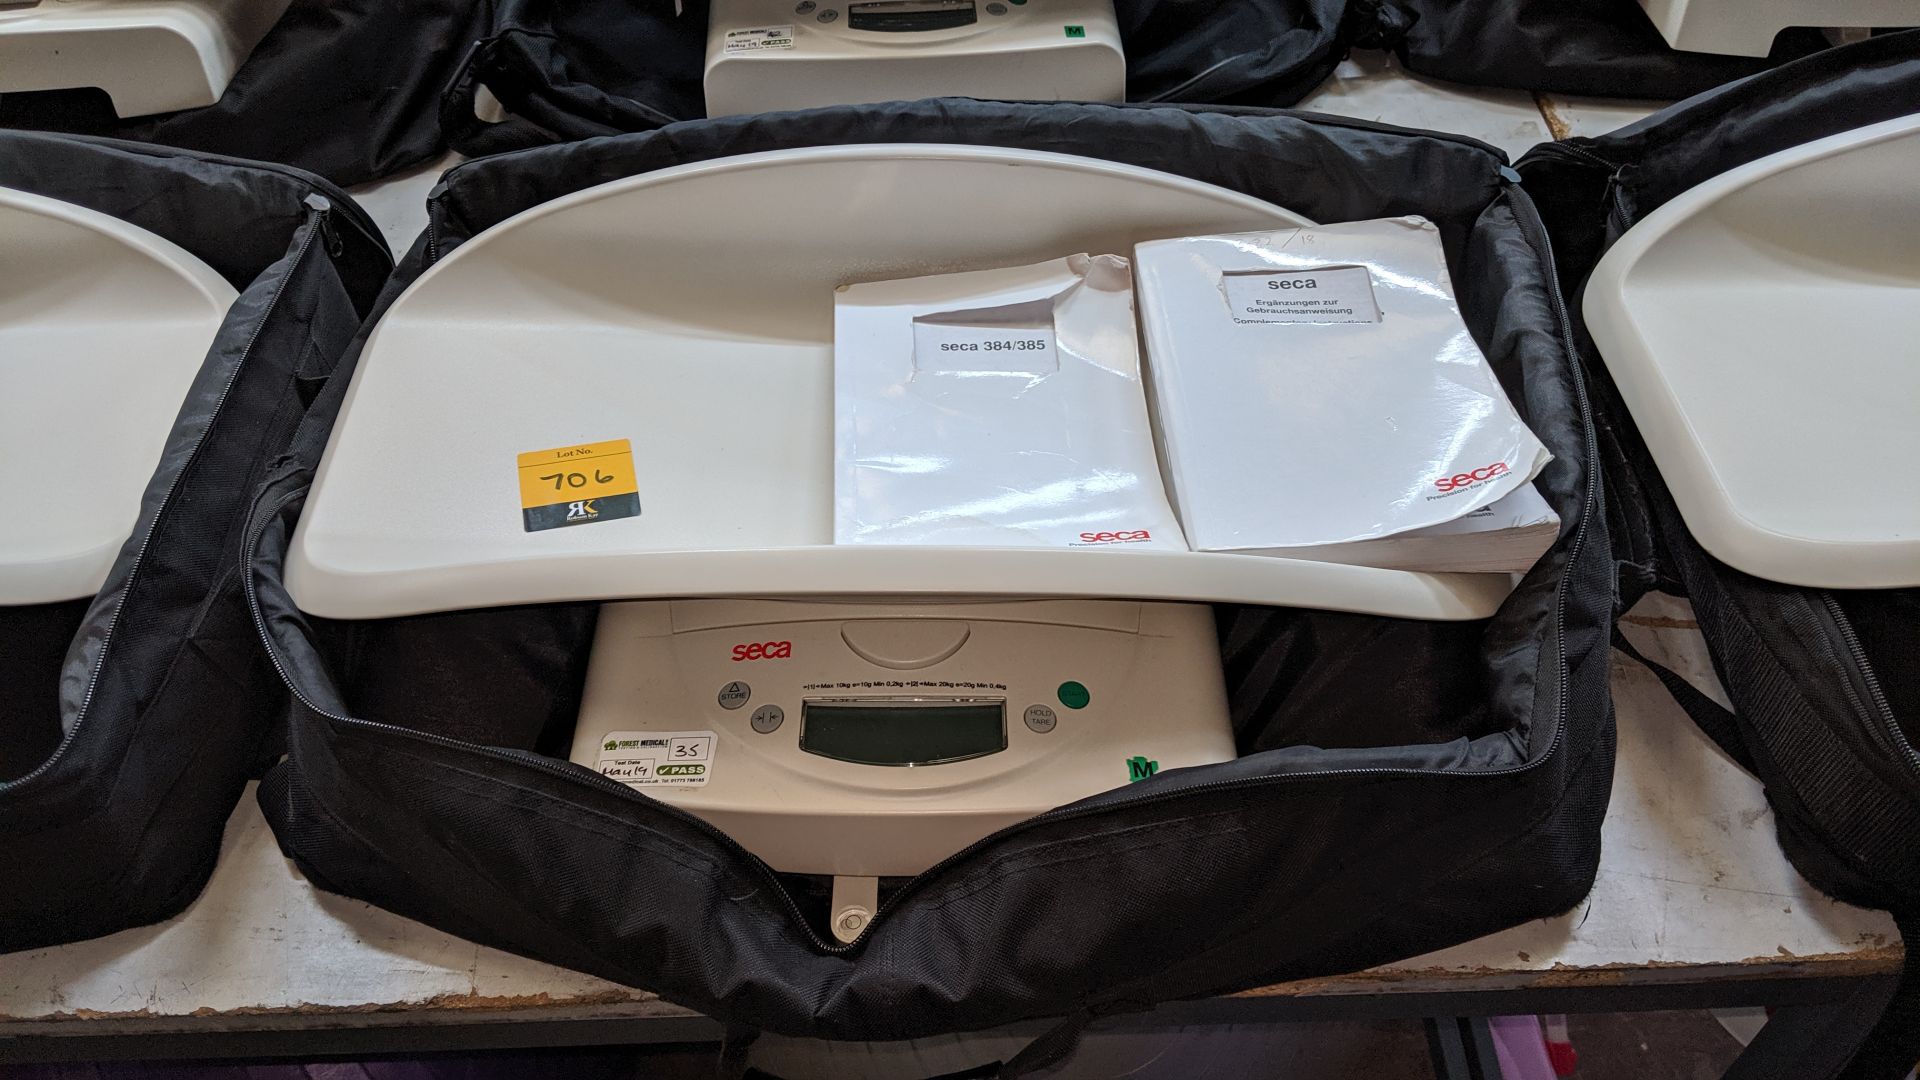 Seca model 384 baby scales max. capacity 20kg. This is one of a large number of lots used/owned by